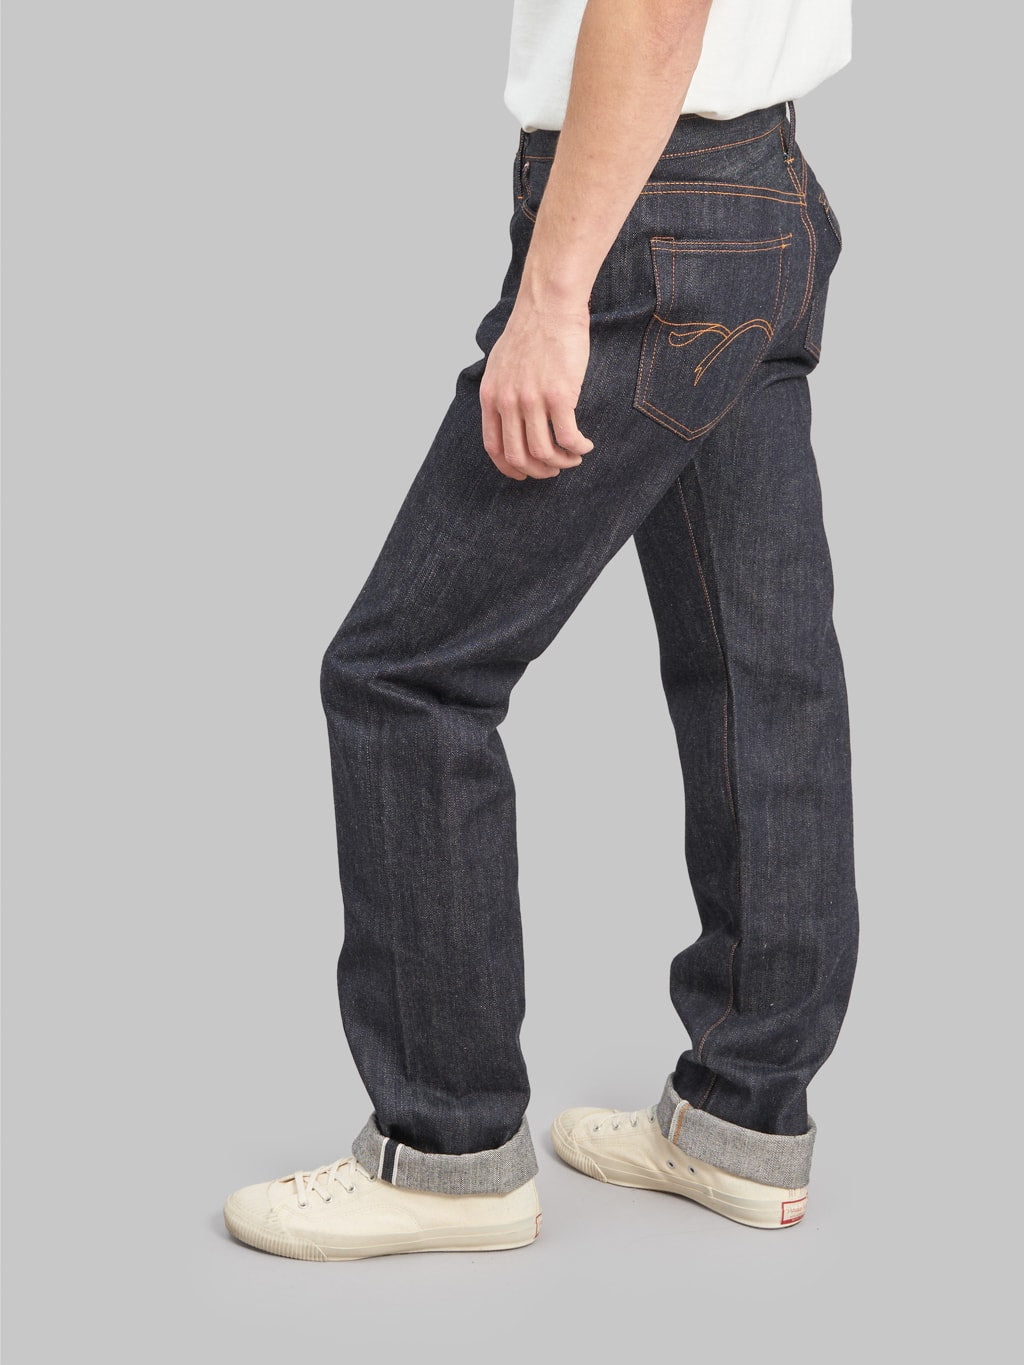 The Flat Head 3009 14.5oz Straight Tapered Jeans